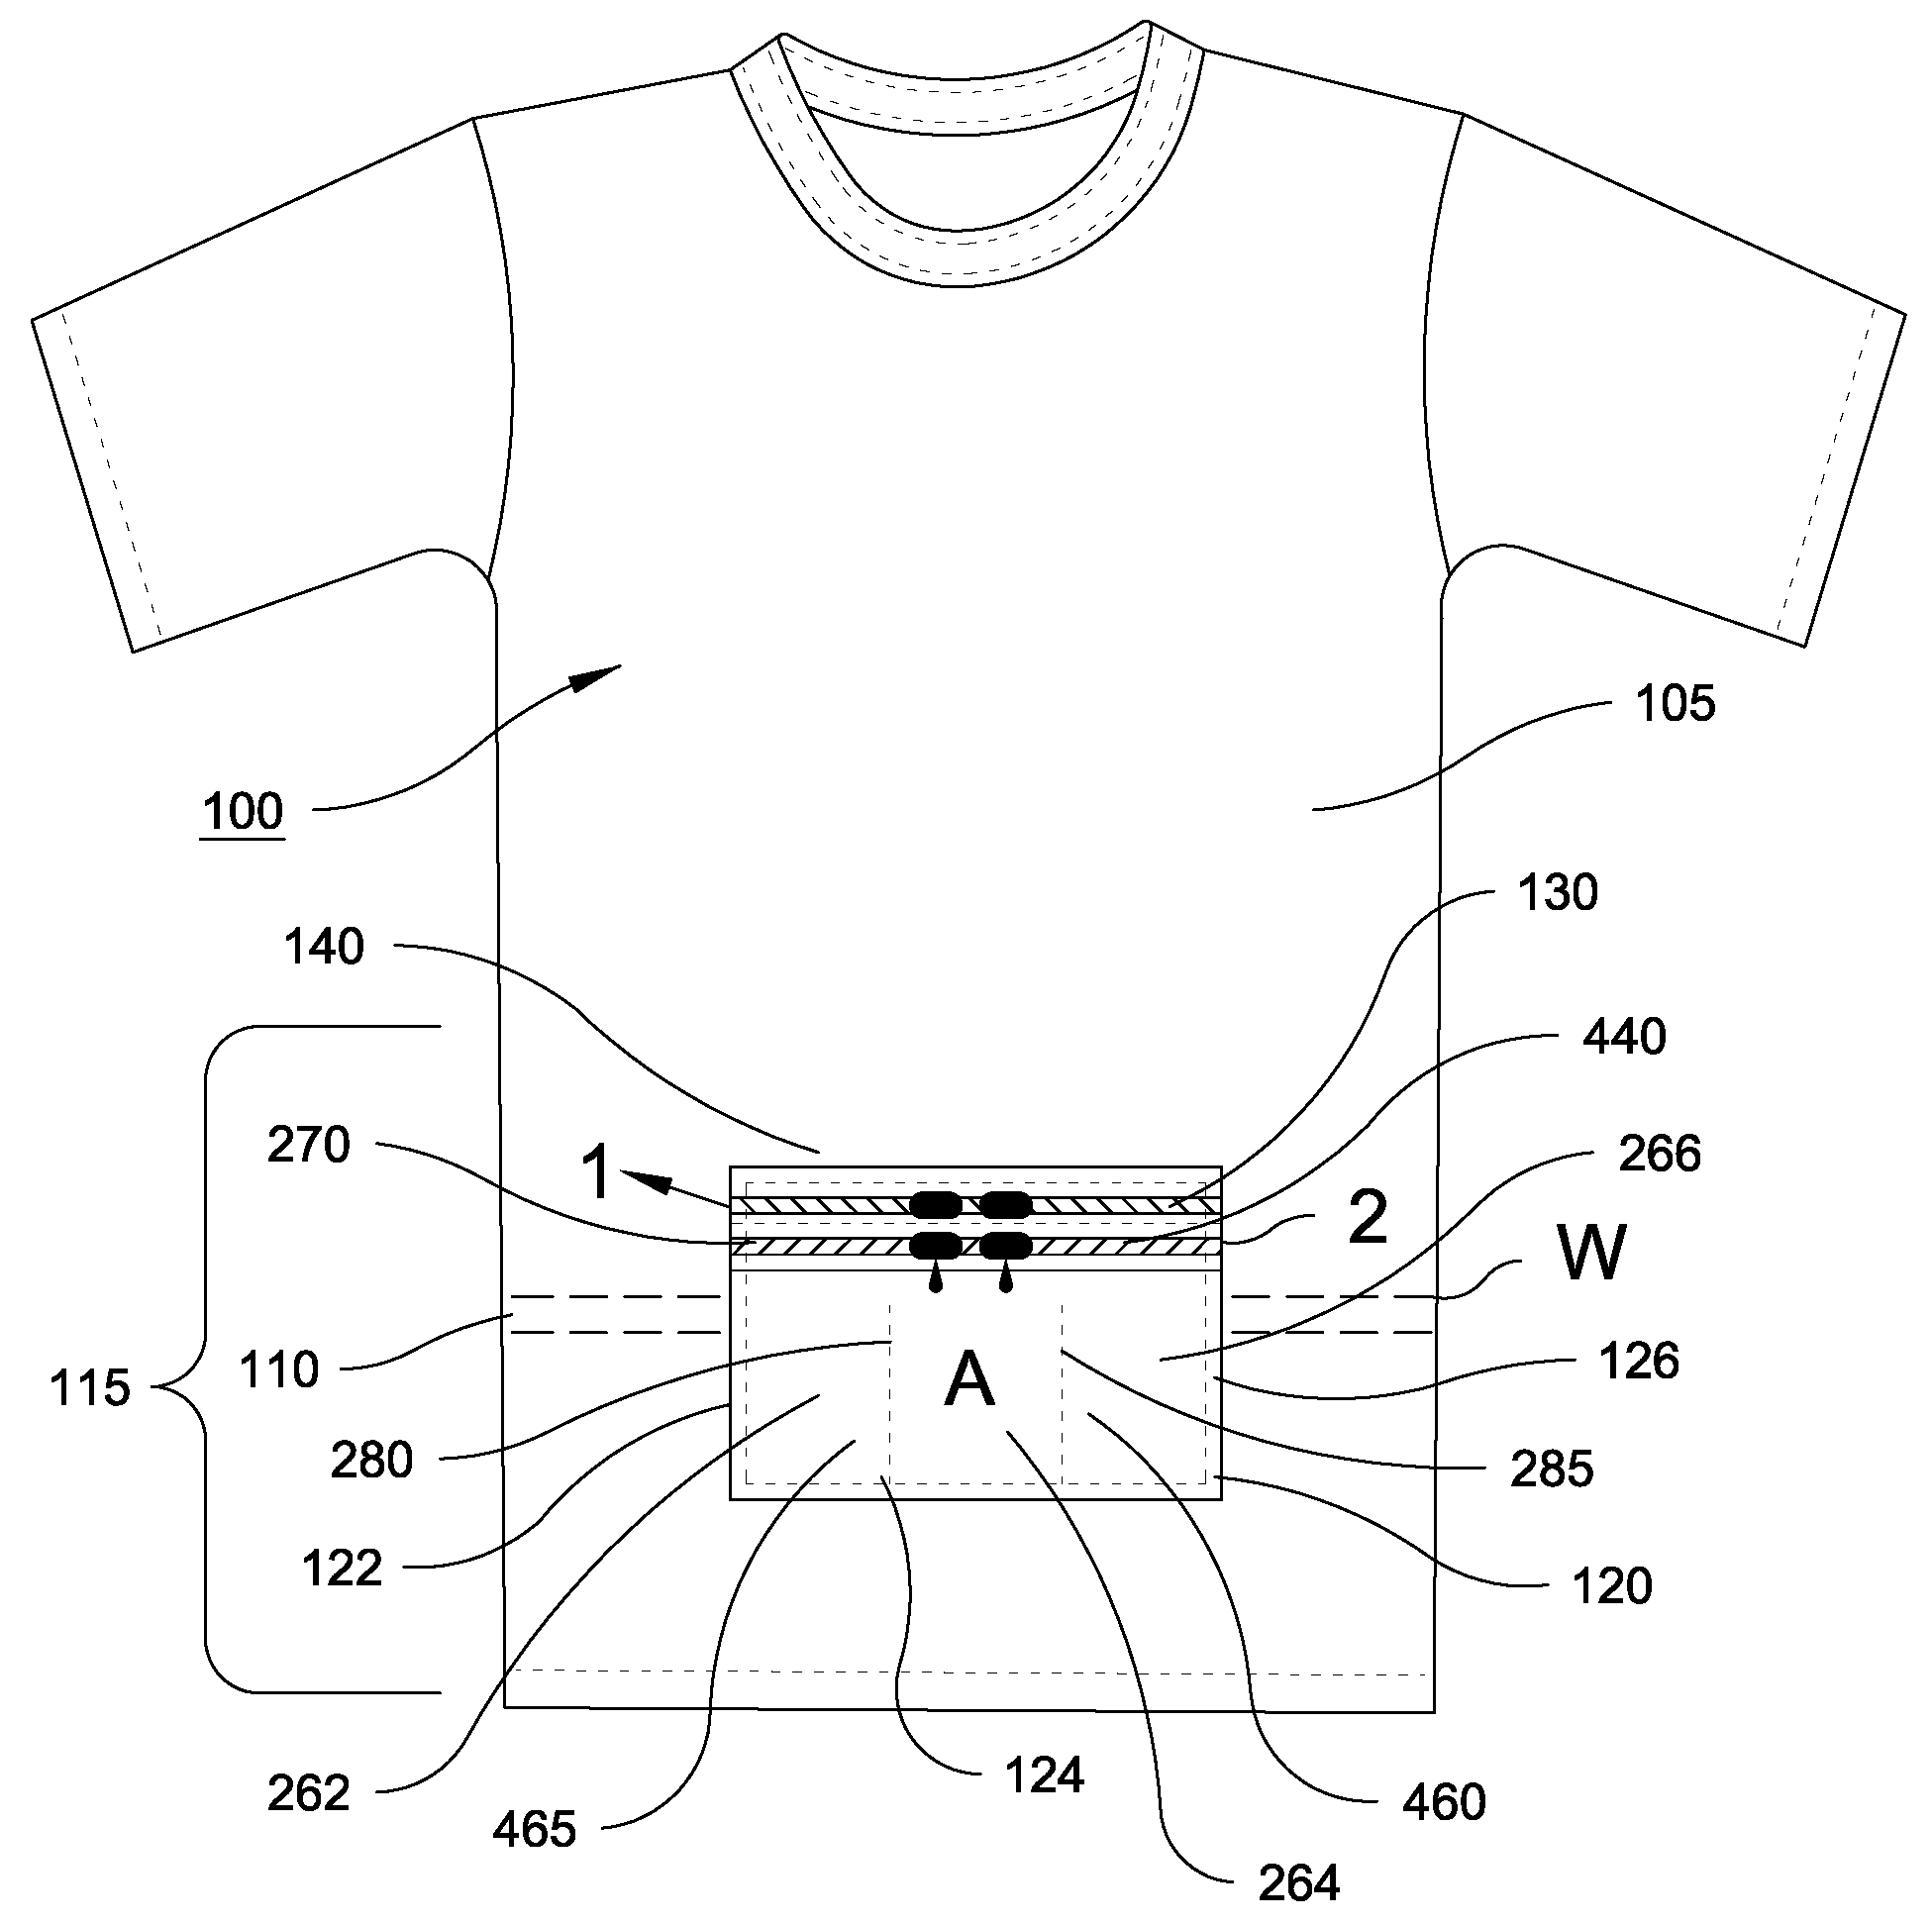 Upper garment with pockets